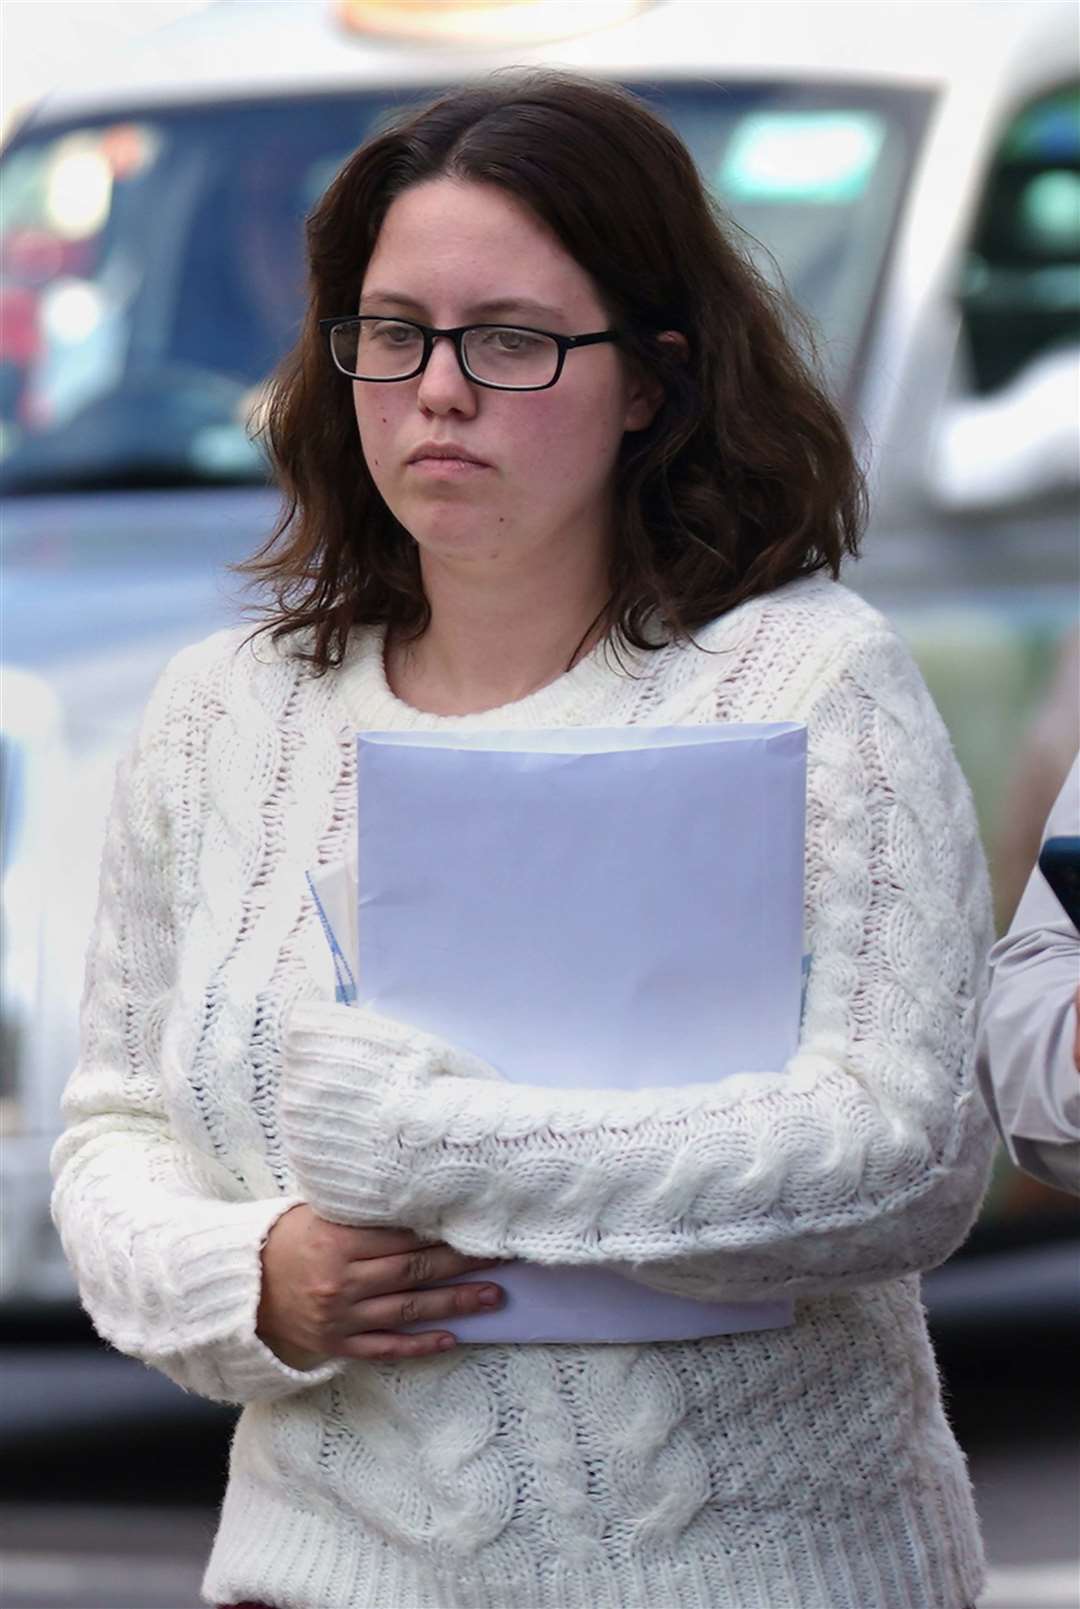 Mikayla Hayes was arrested, charged and remanded in custody following a hearing at Norfolk Magistrates’ Court on August 29 (Yui Mok/PA)